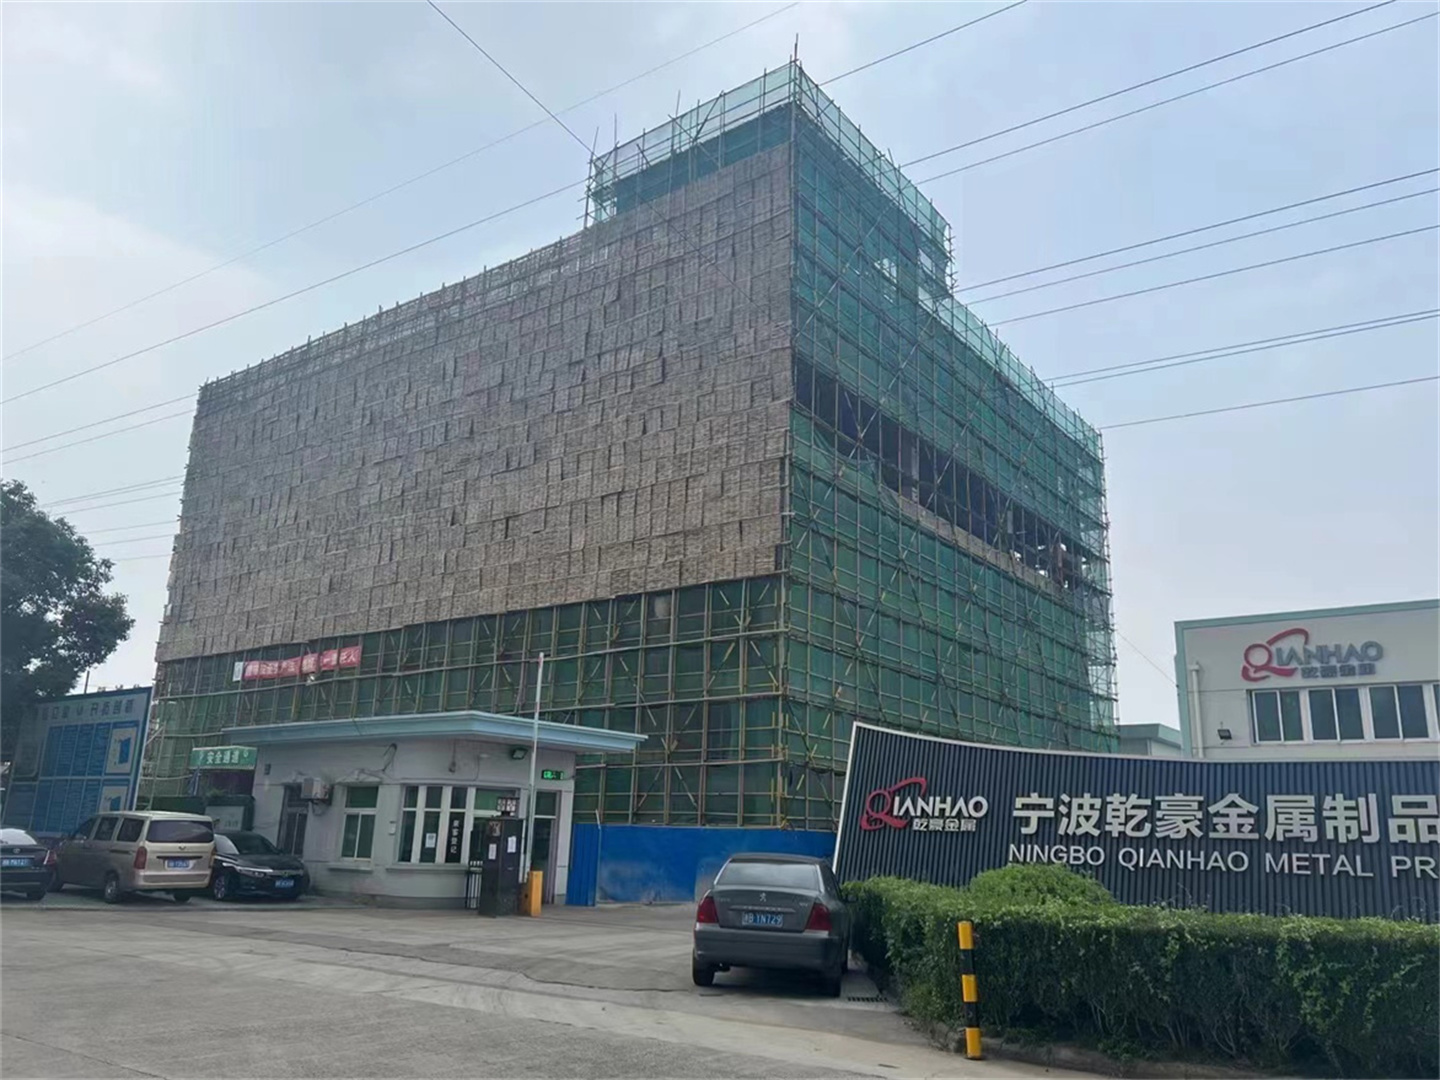 Qianhao site expansion and new production shop layout is on the way